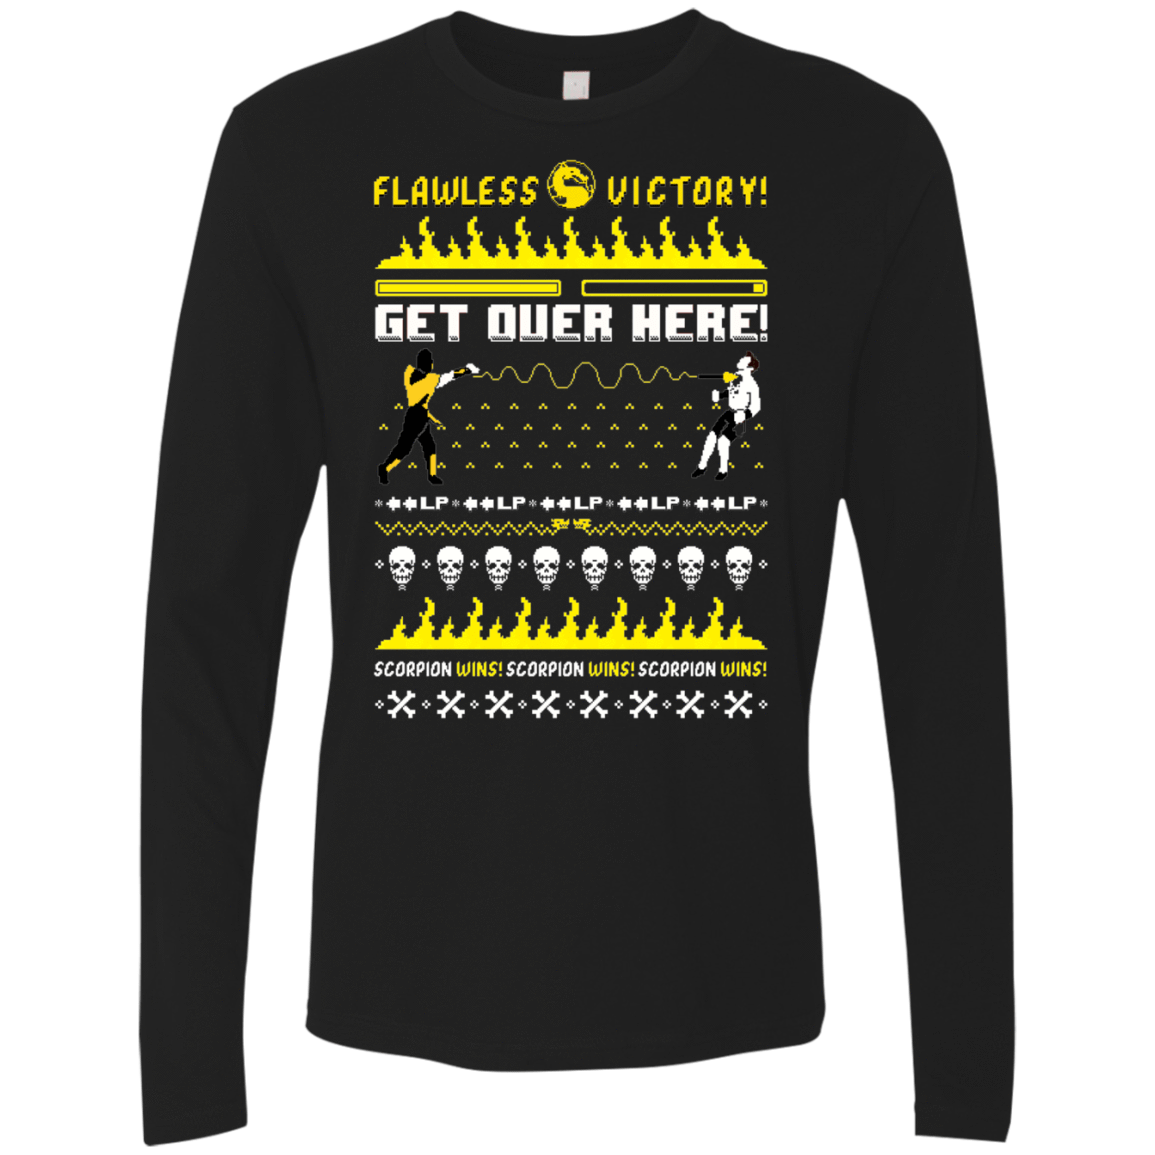 T-Shirts Black / Small Get Over Here Ugly Sweater Men's Premium Long Sleeve